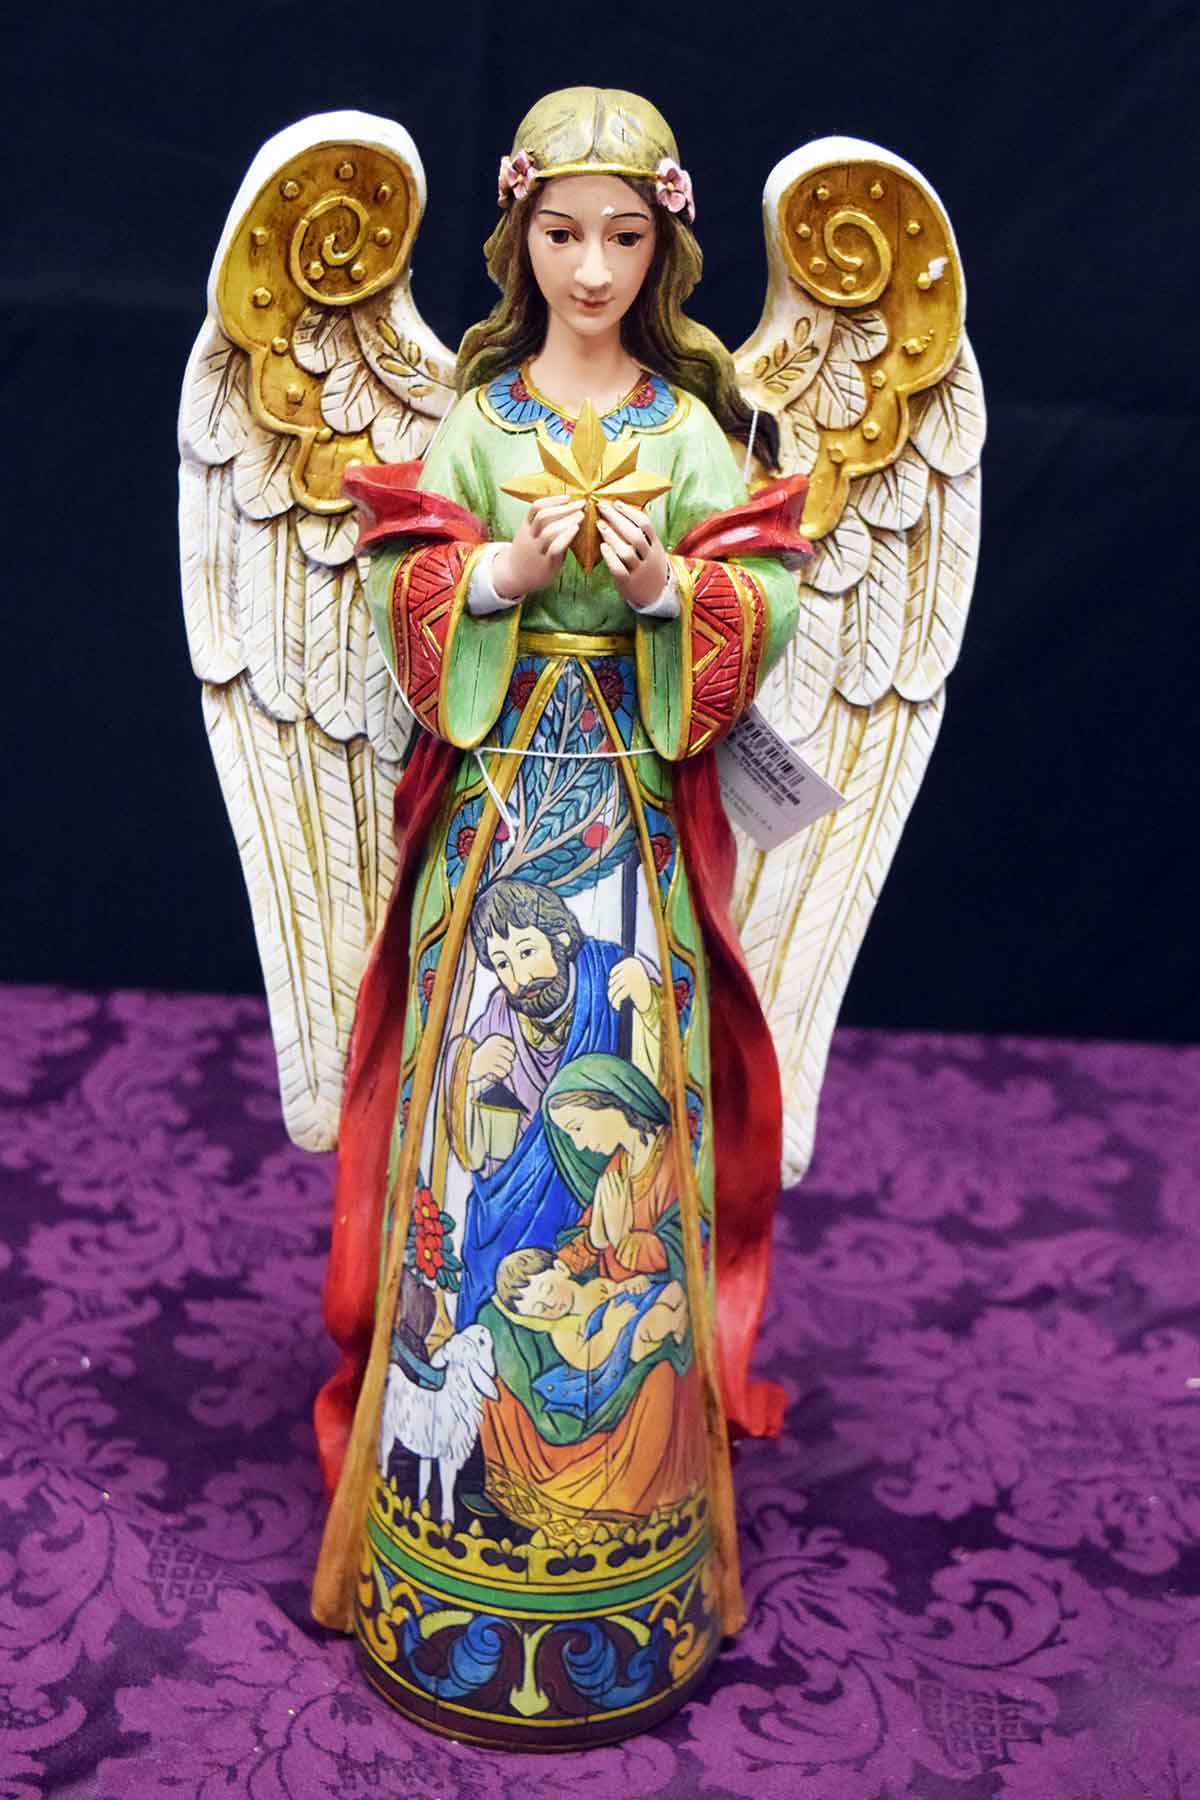 X10_Angel_with_Star_with_Holy_Family_in_Skirt_-_CCMLpic-X.jpg